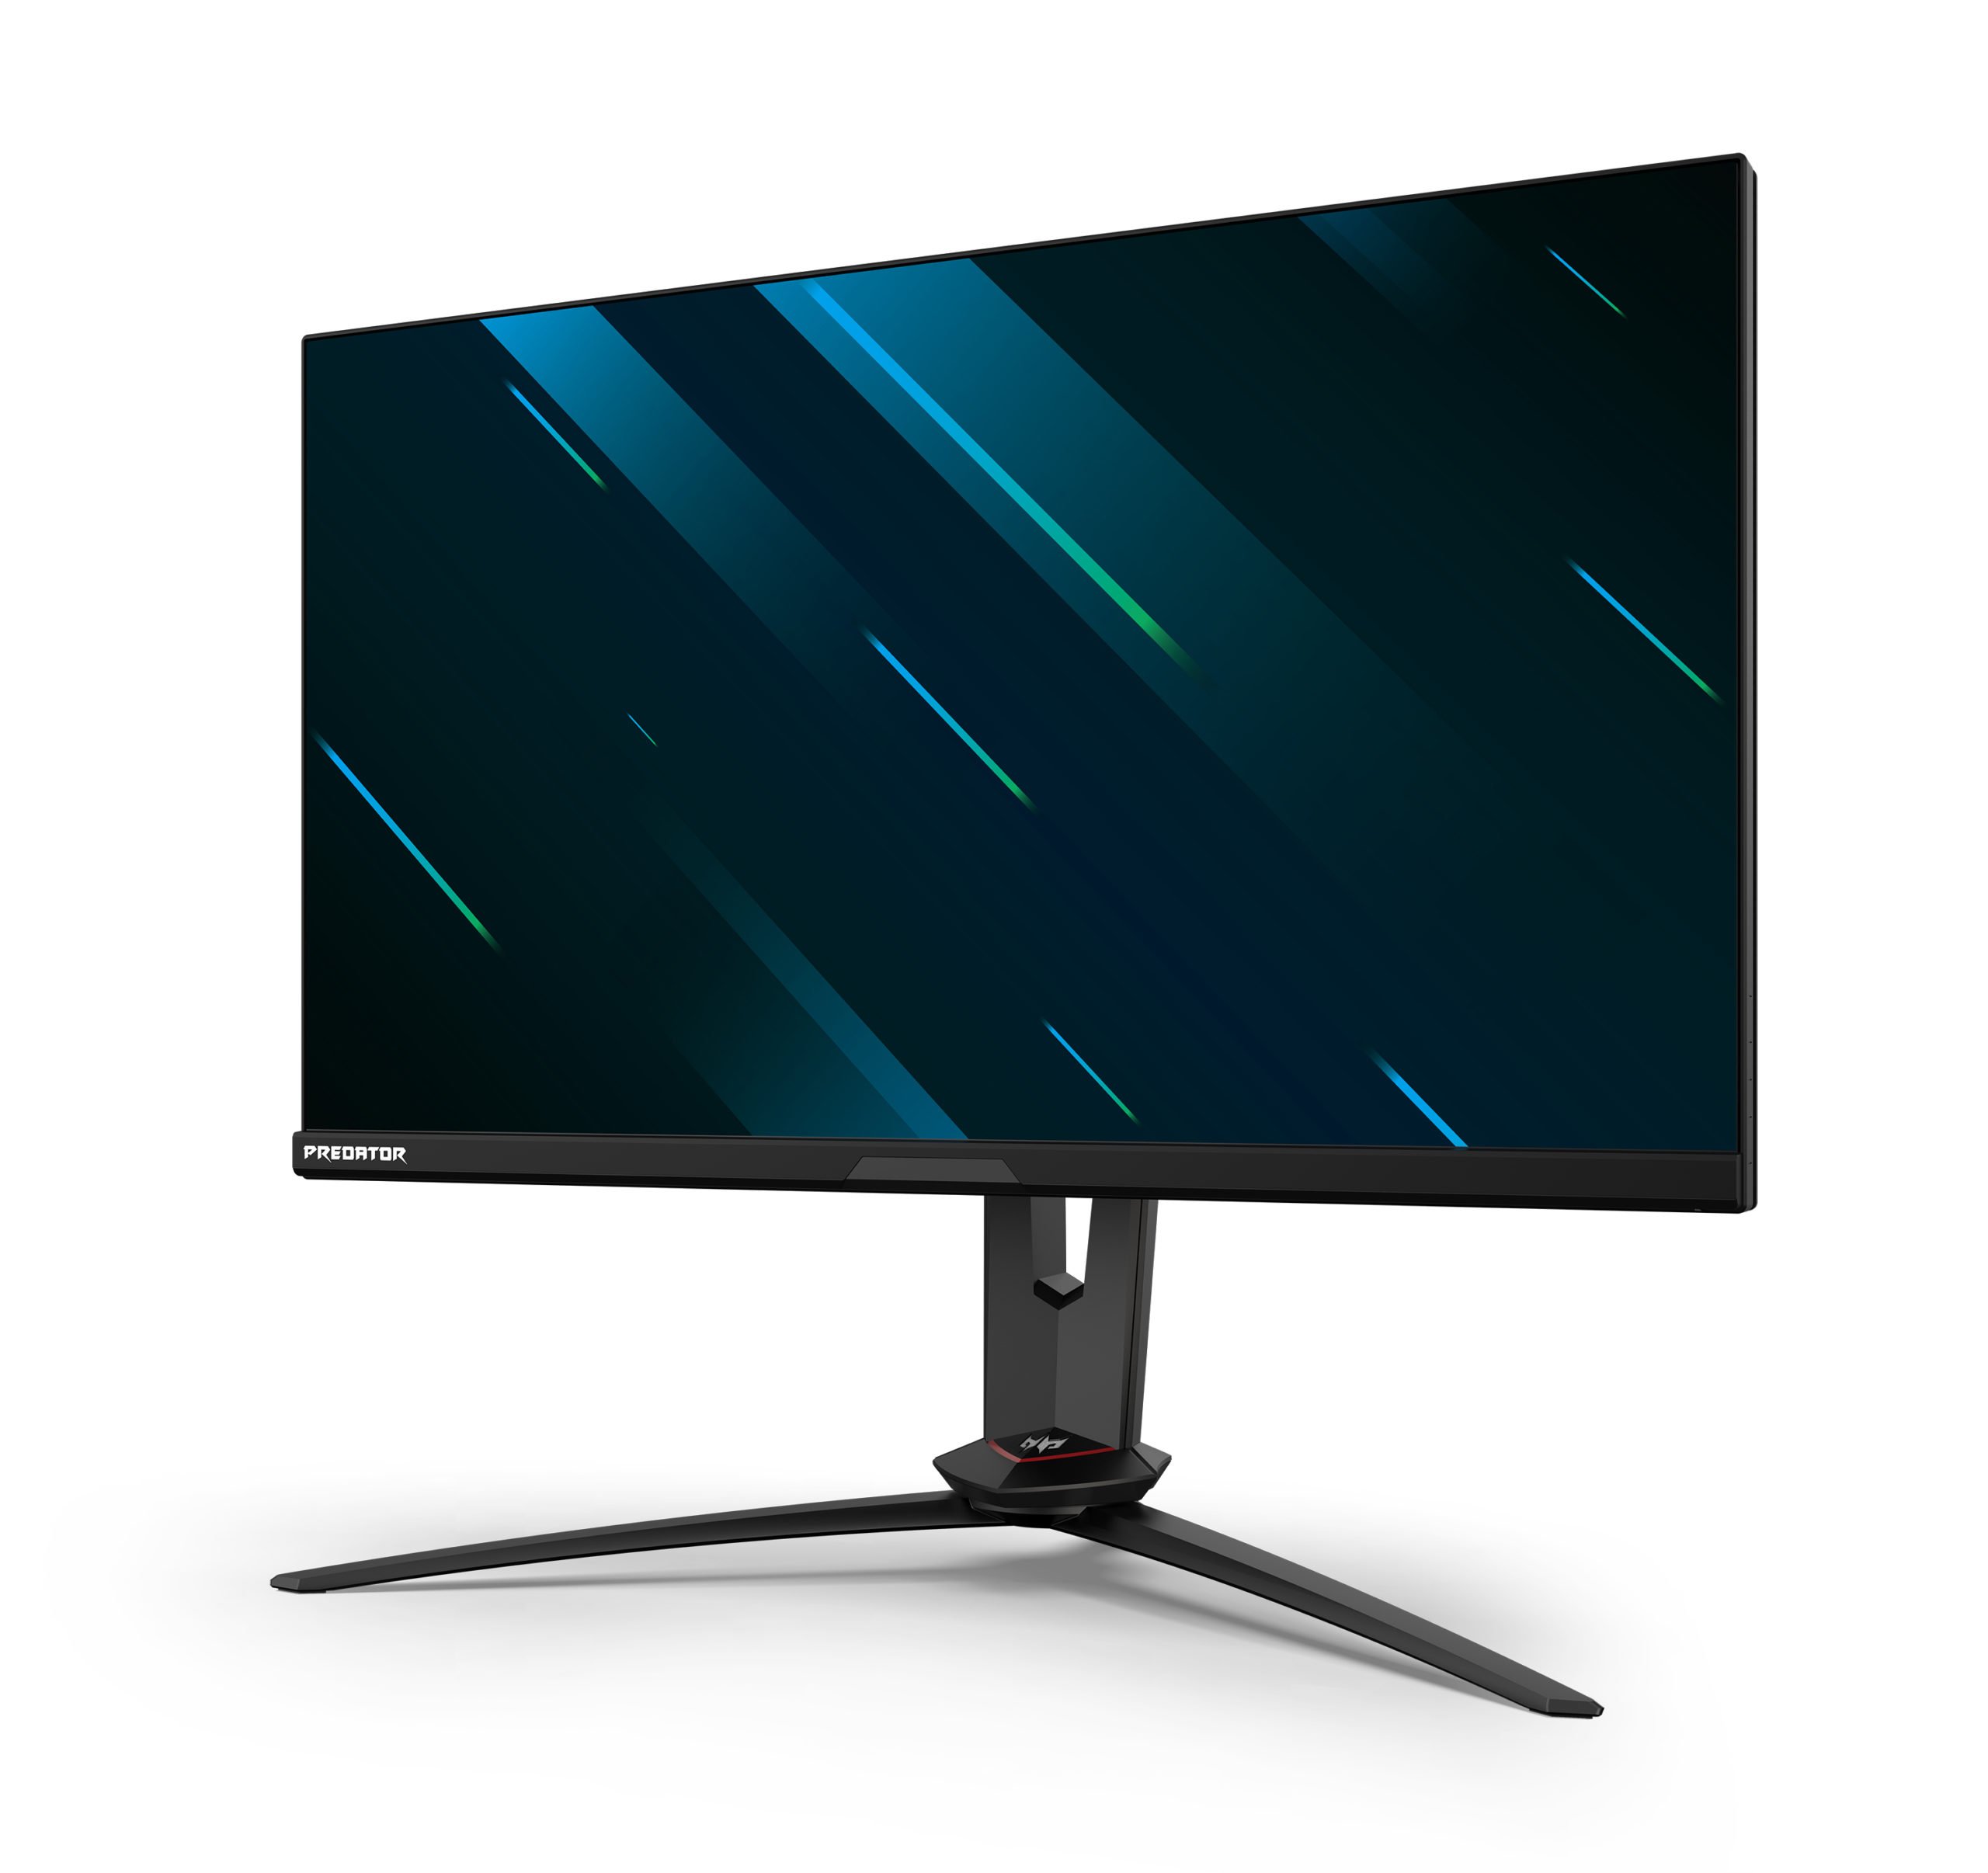 Acer Expands its Award-Winning Gaming Monitor Portfolio With 6 New Predator and Nitro Models